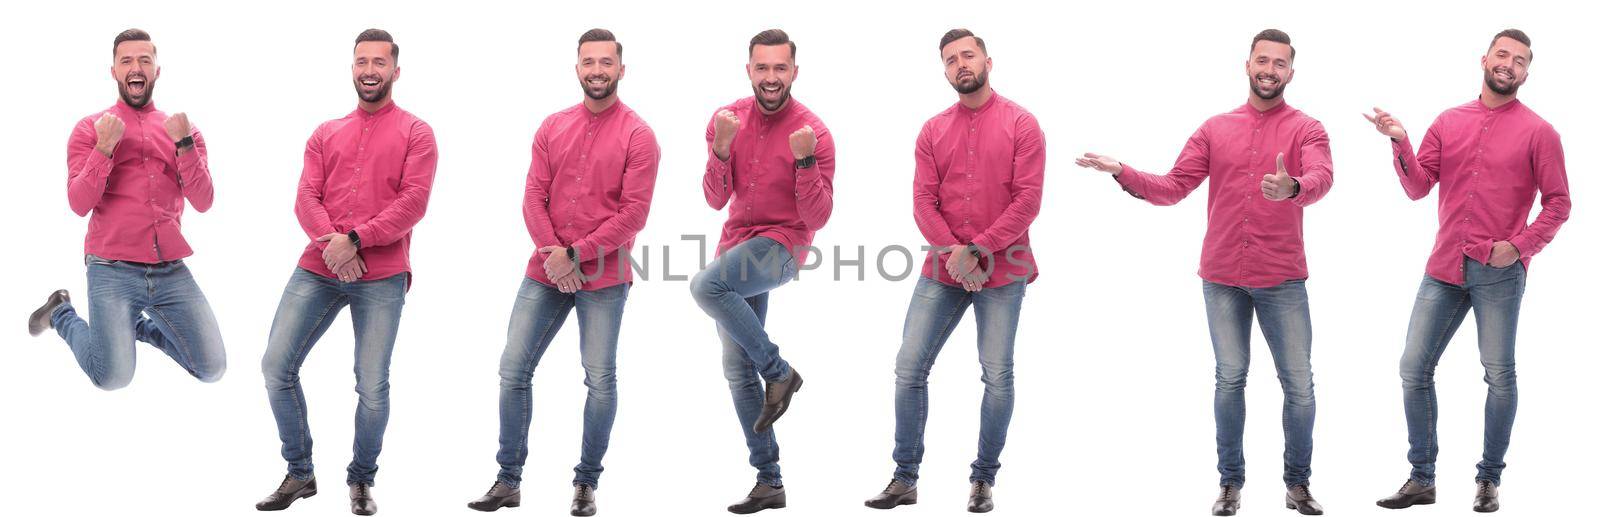 collage of photos of a modern man in a red shirt. by asdf